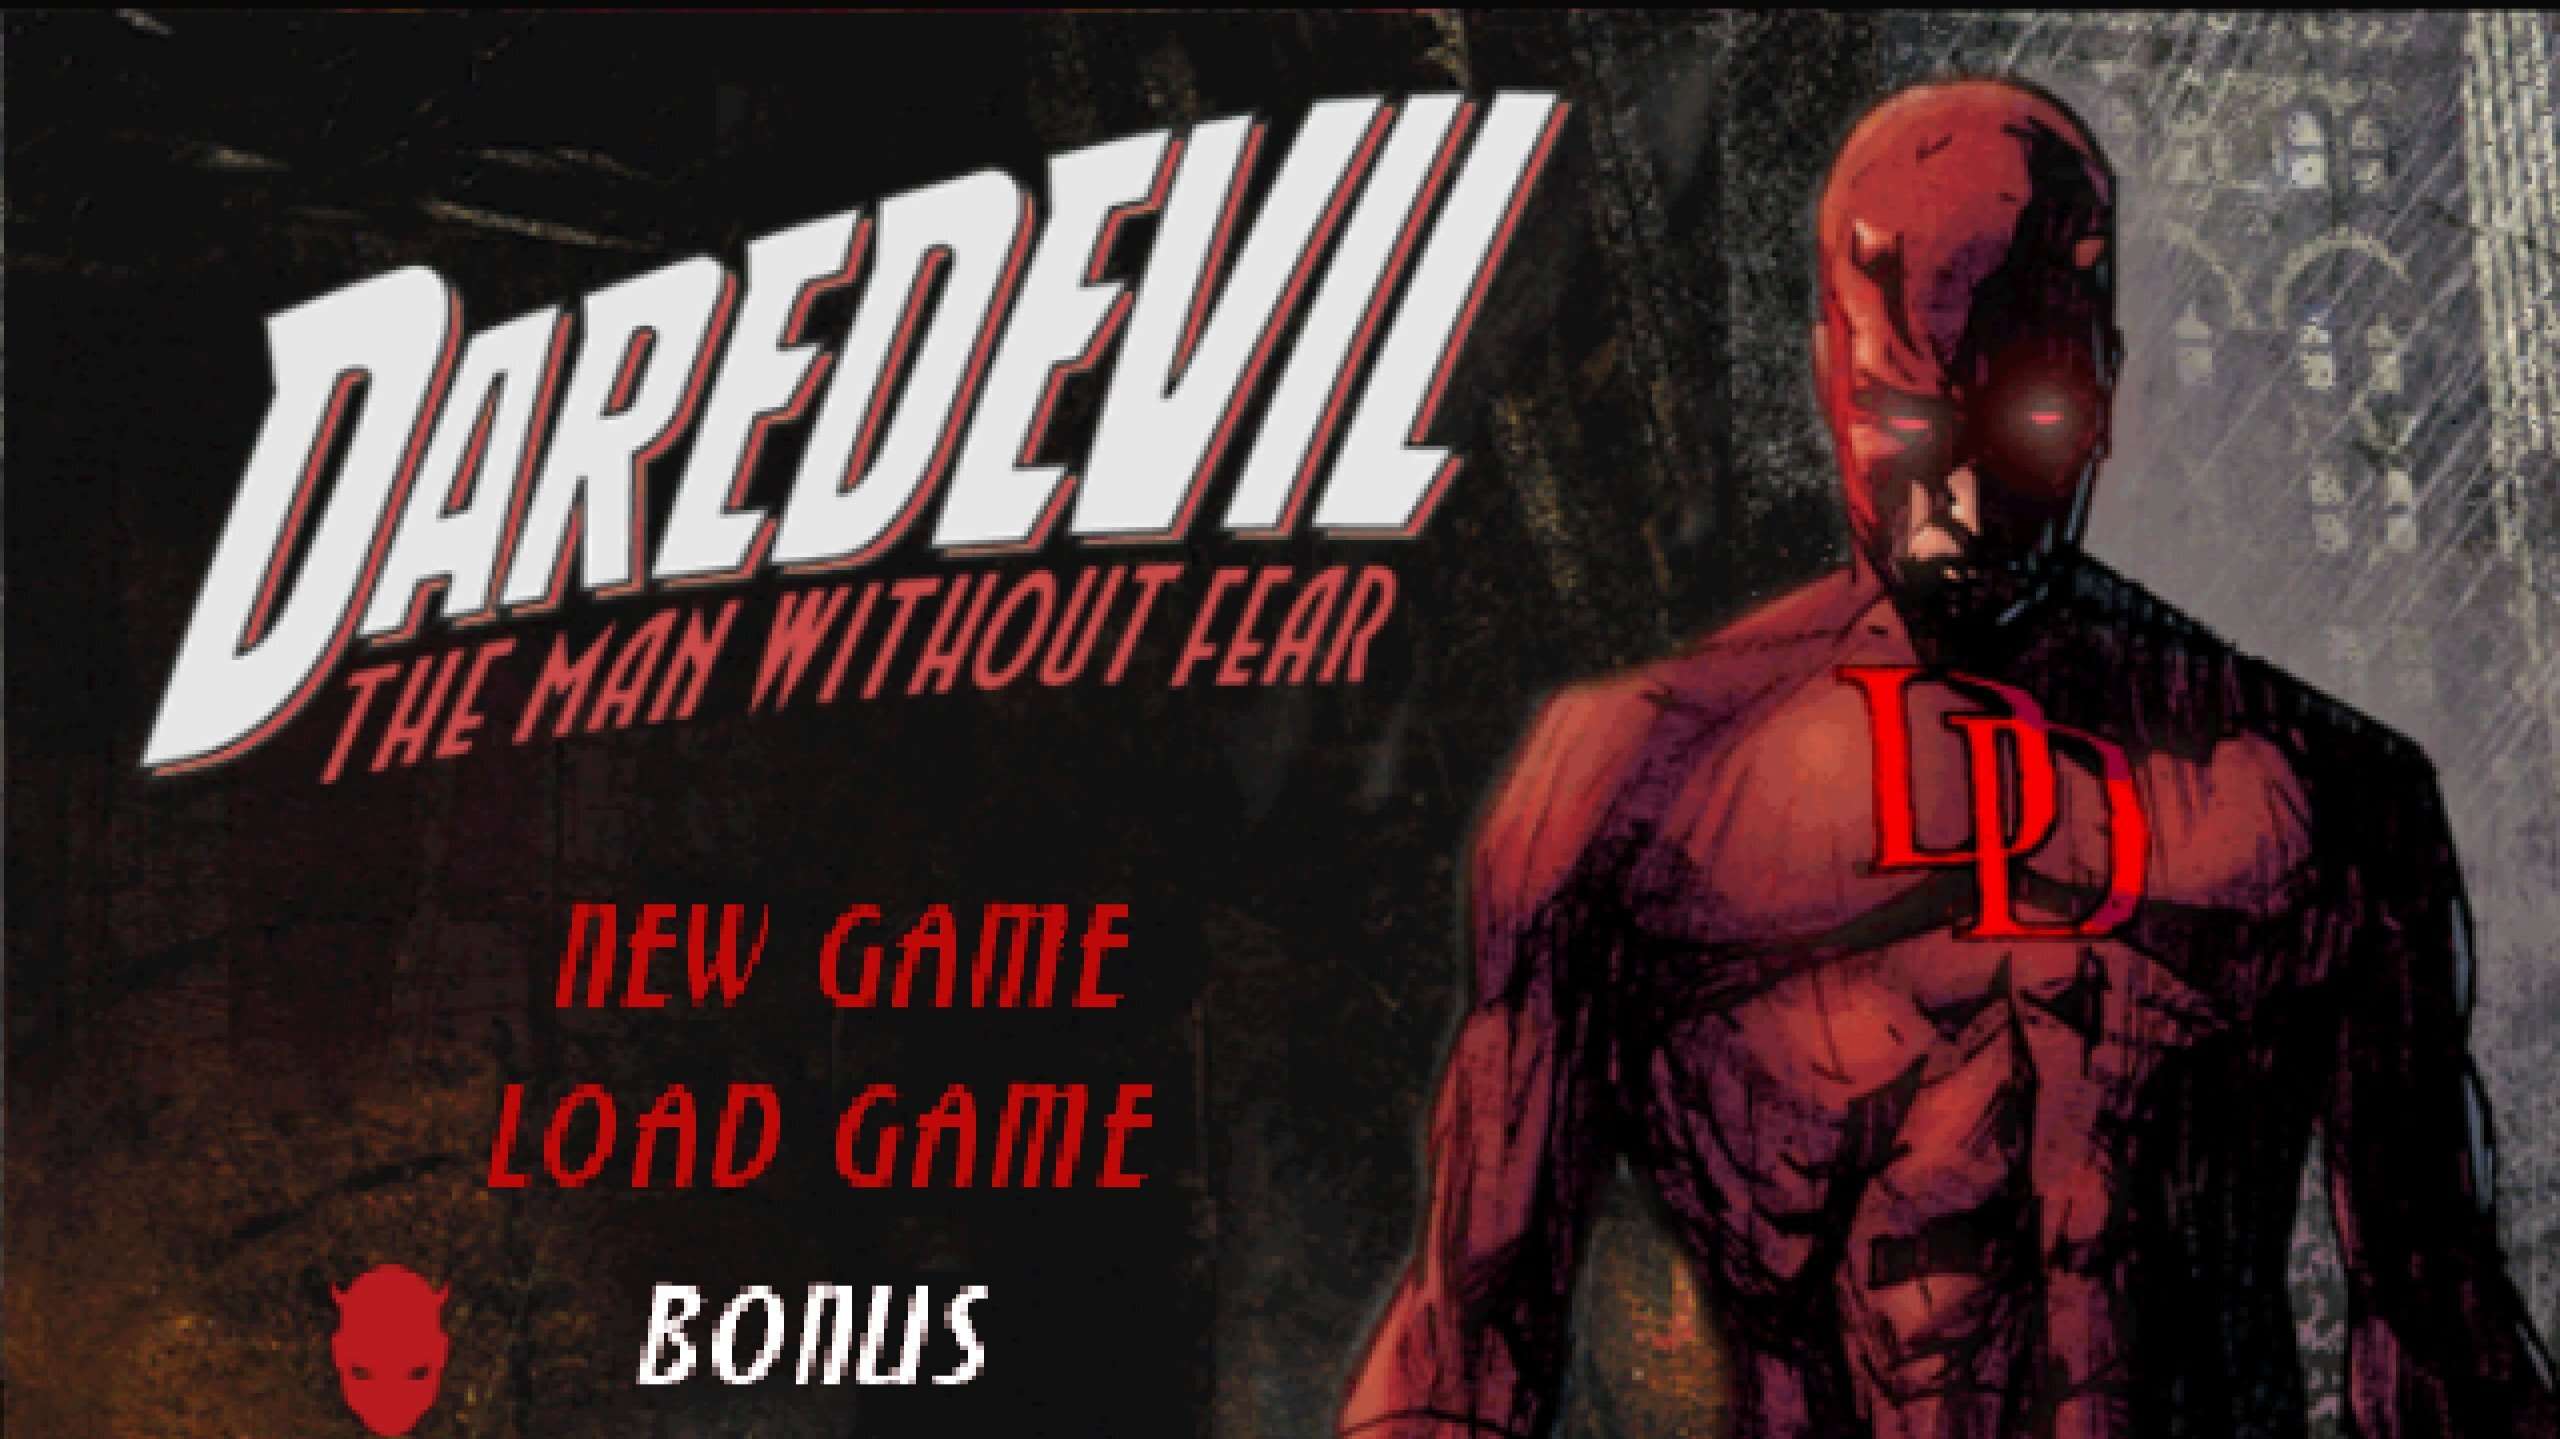 Menu from Daredevil The Man Without Fear PS2